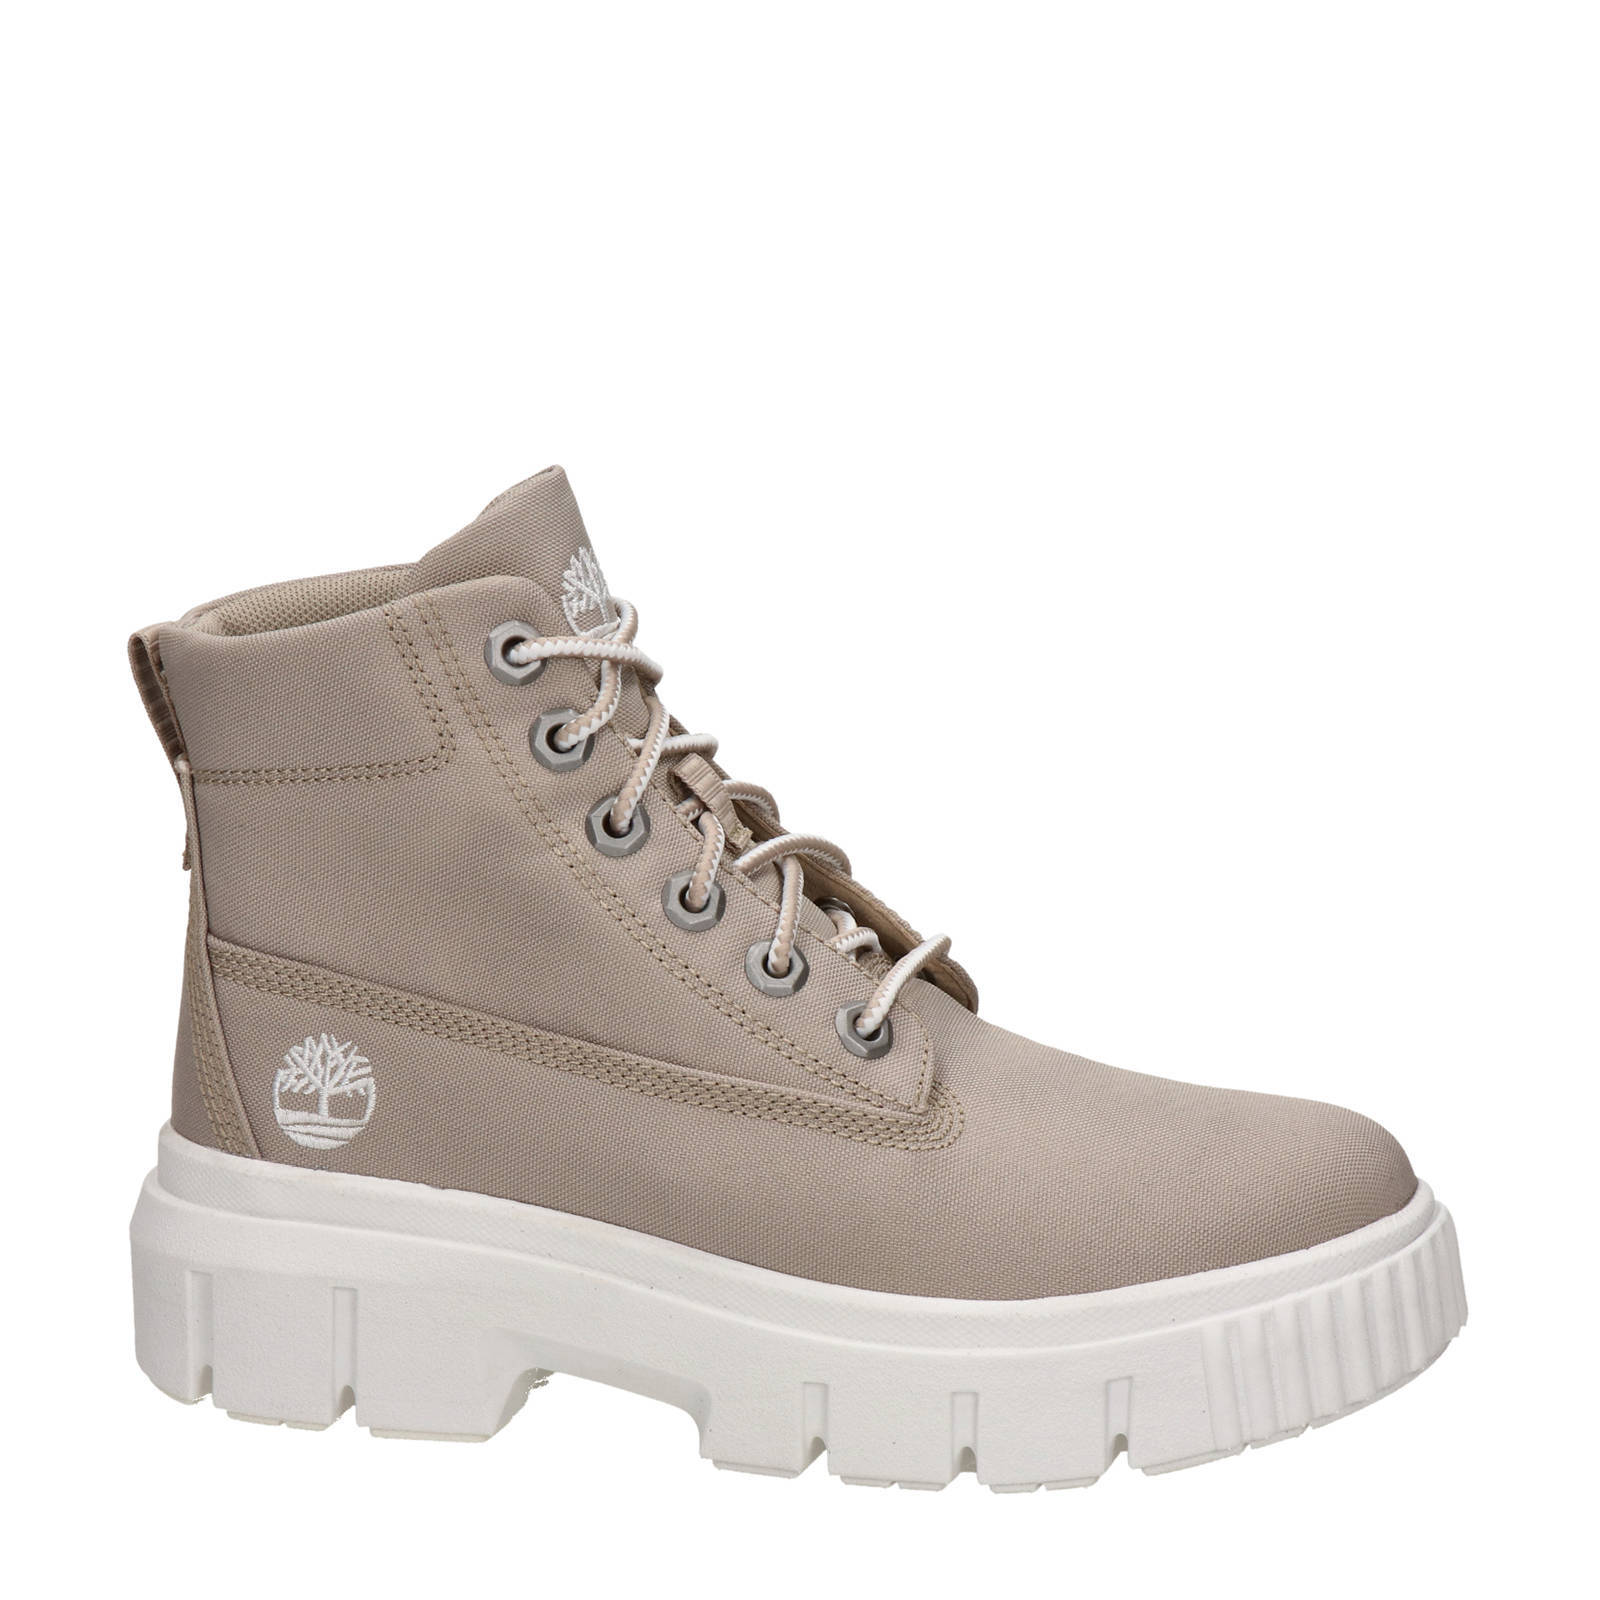 Greyfield canvas veterboots taupe